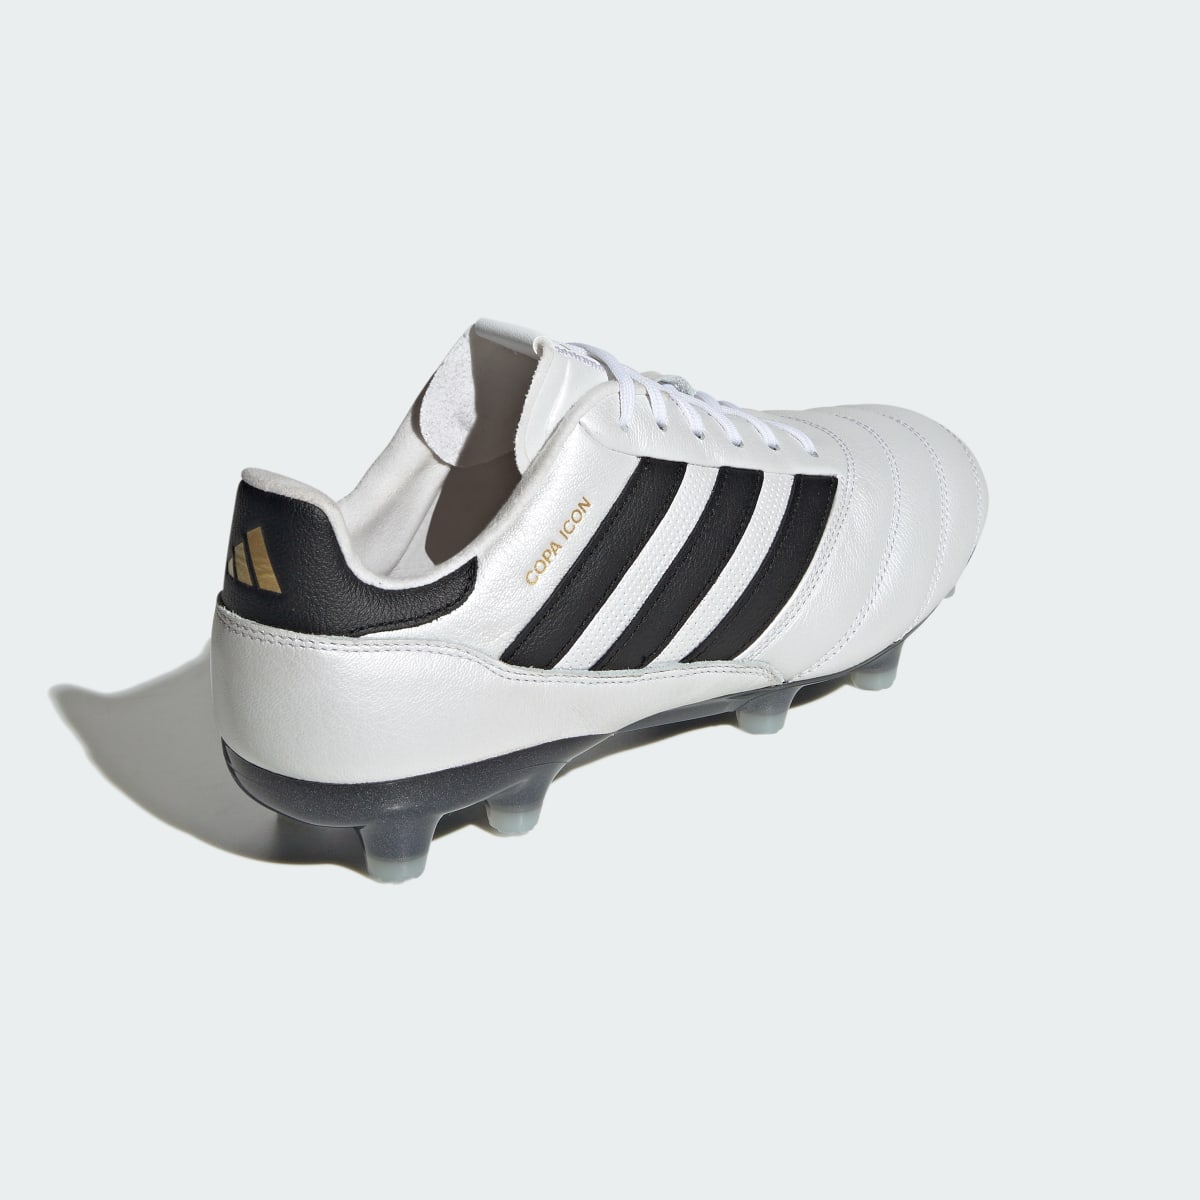 Adidas Copa Icon Firm Ground Boots. 6